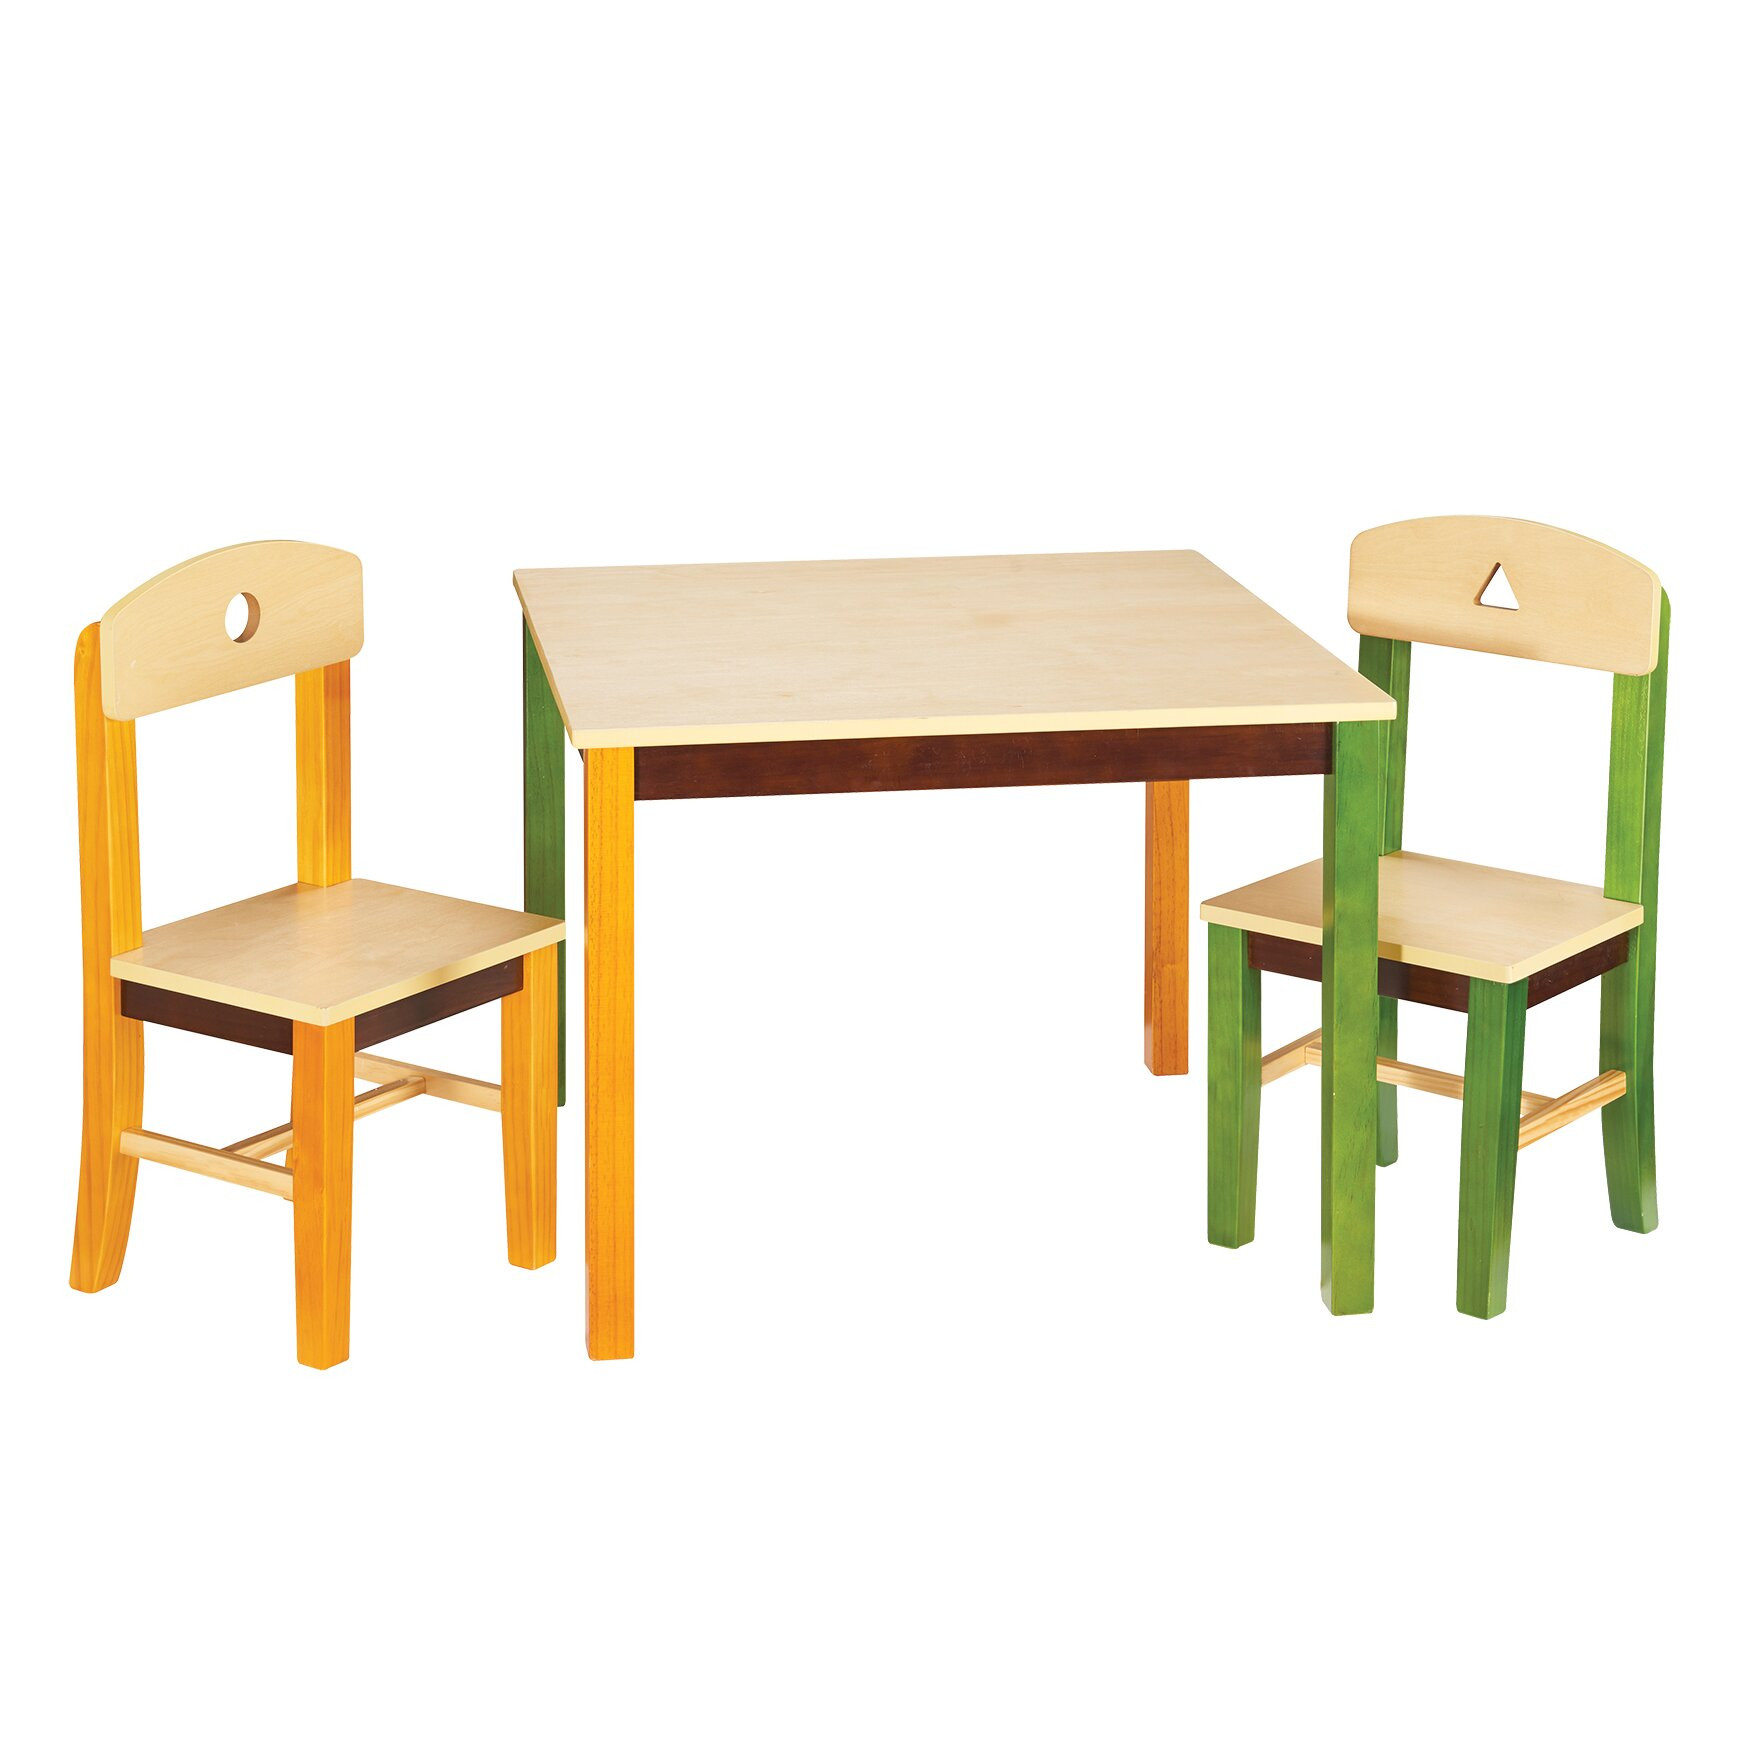 Kids Table And Chair Set
 Guidecraft See and Store Kids 3 Piece Rectangle Table and